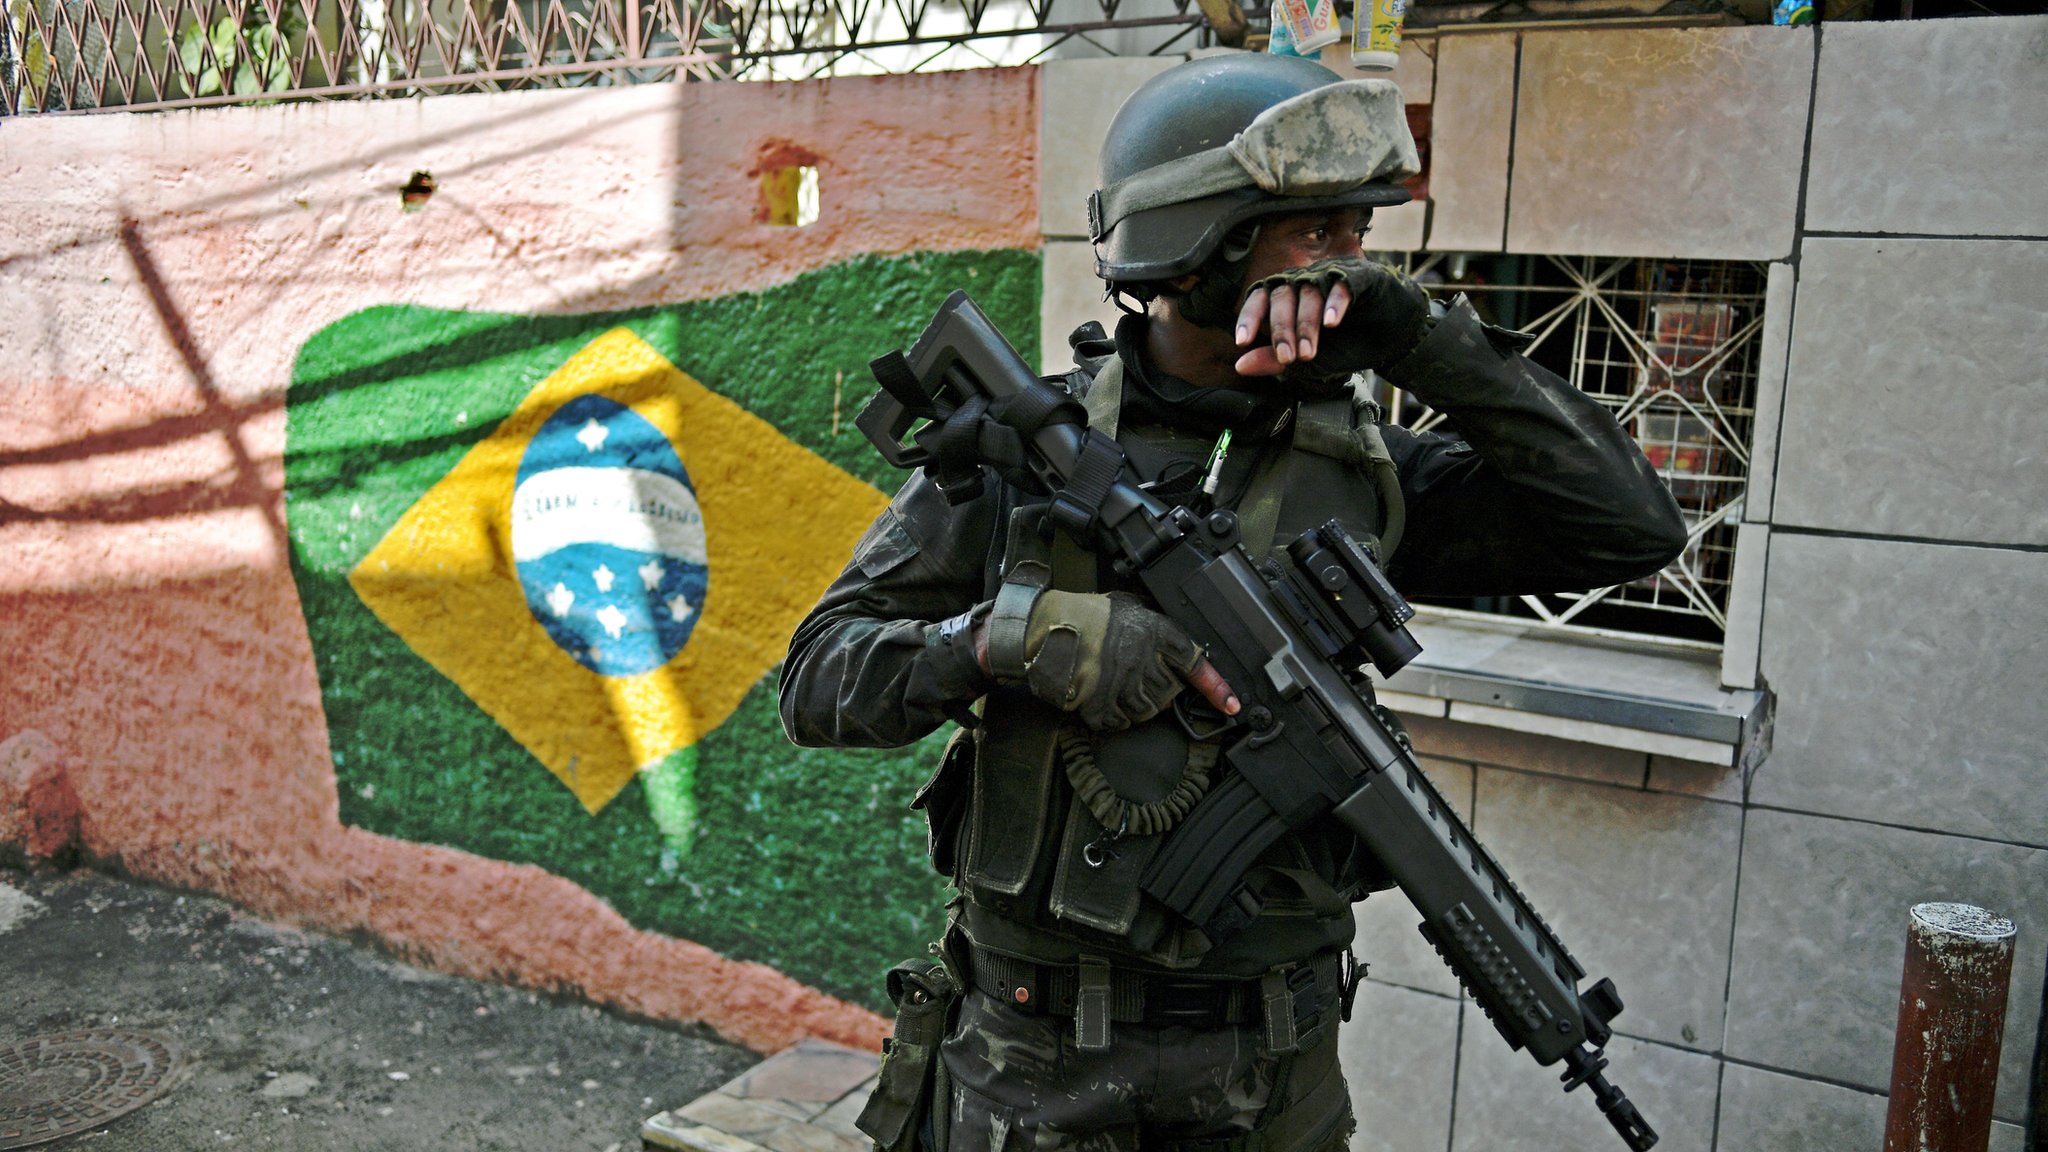 Brazil and Military music